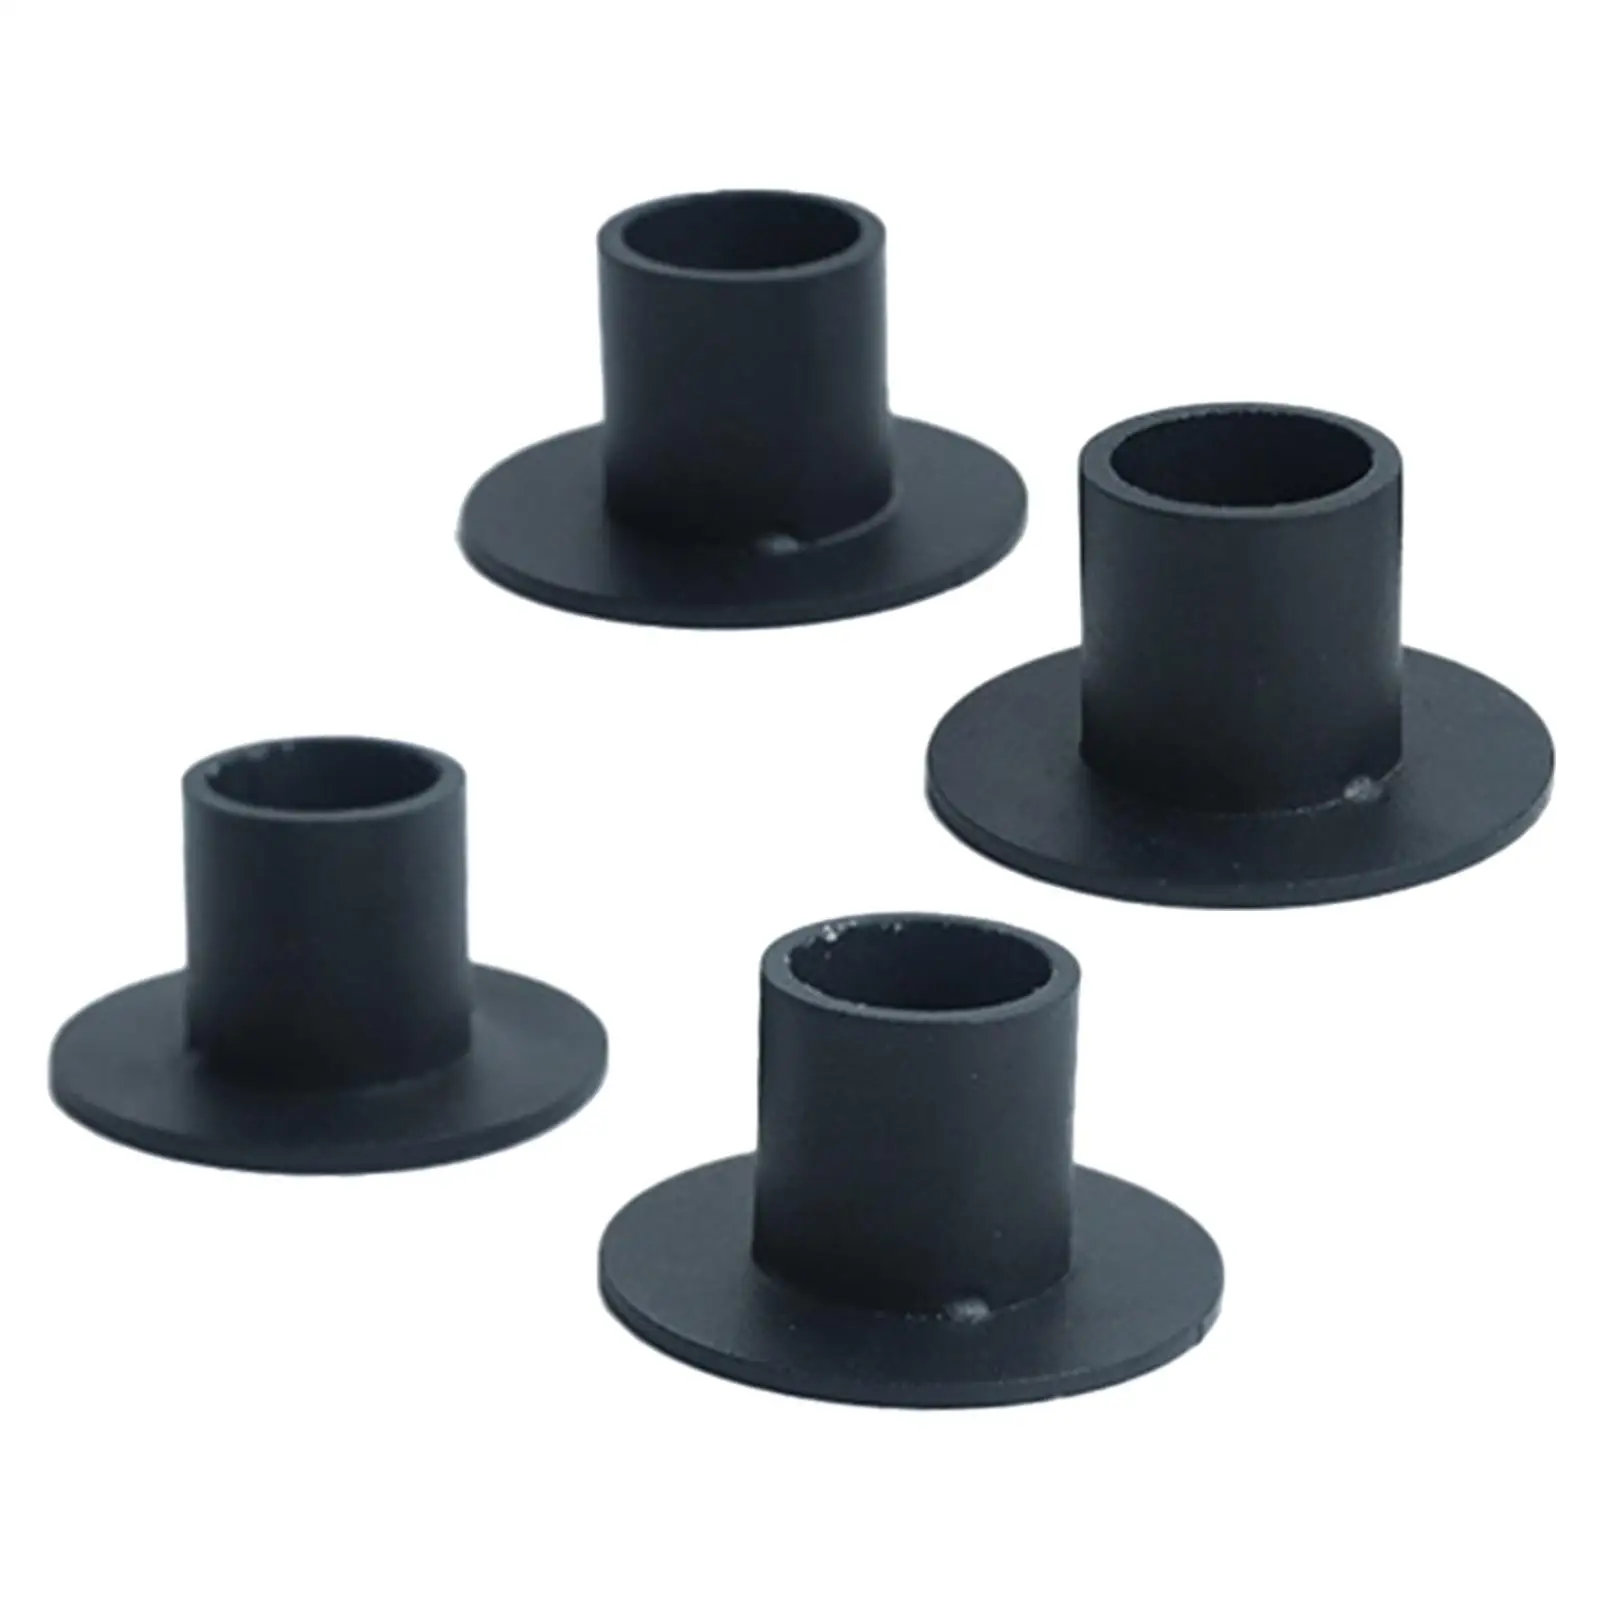 4 Pieces Pillar Candle Holder Candle Stand Vintage Style Candlestick Holder for Dining Table Party Bedroom Home Decors